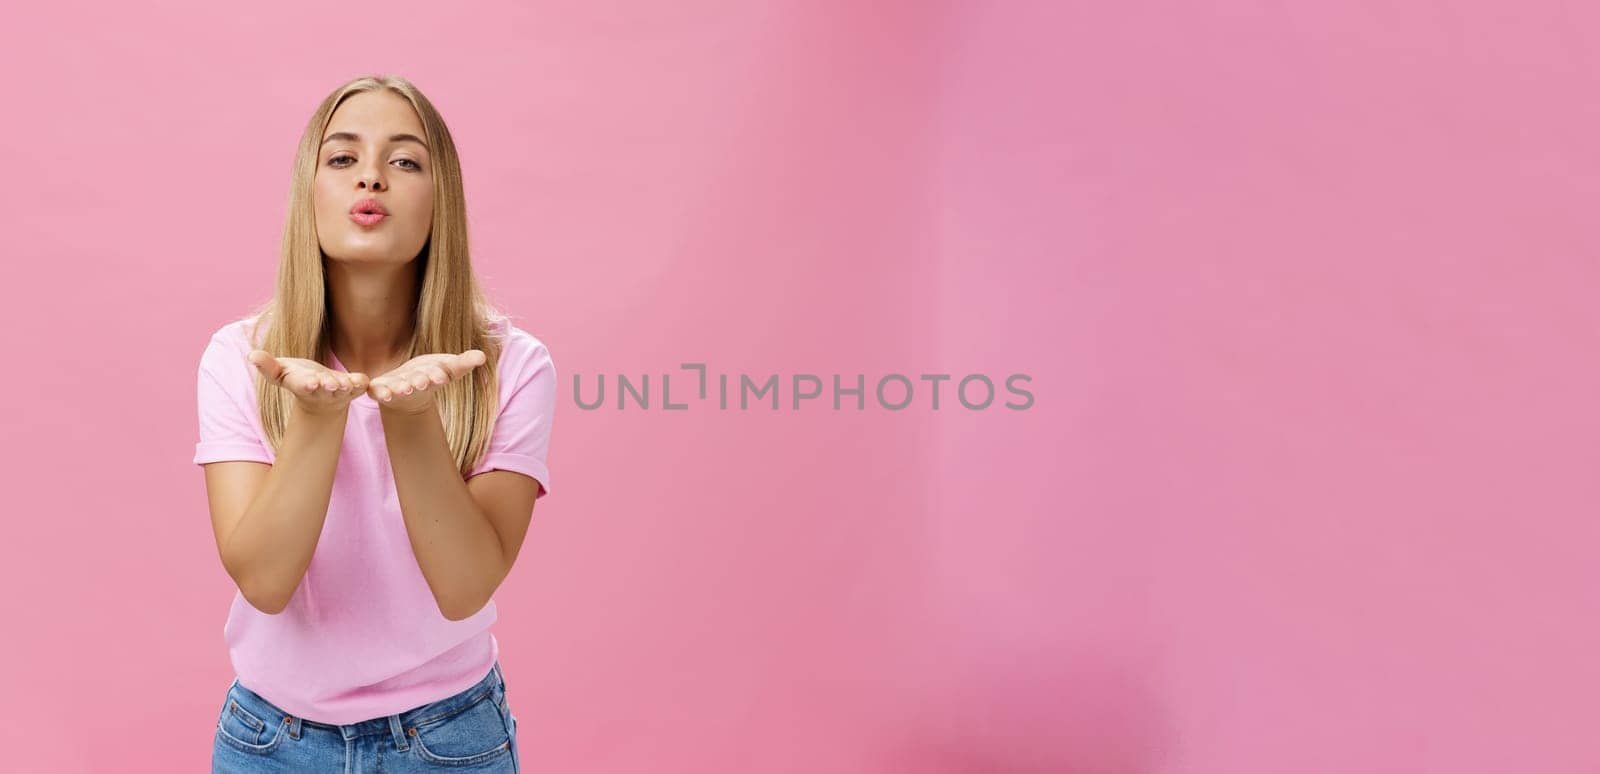 Feminine and flirty charming pretty girl with tanned skin and fair straight hair holding palms near folded lips sending air kiss at camera with sensual expression posing over pink background. Lifestyle.